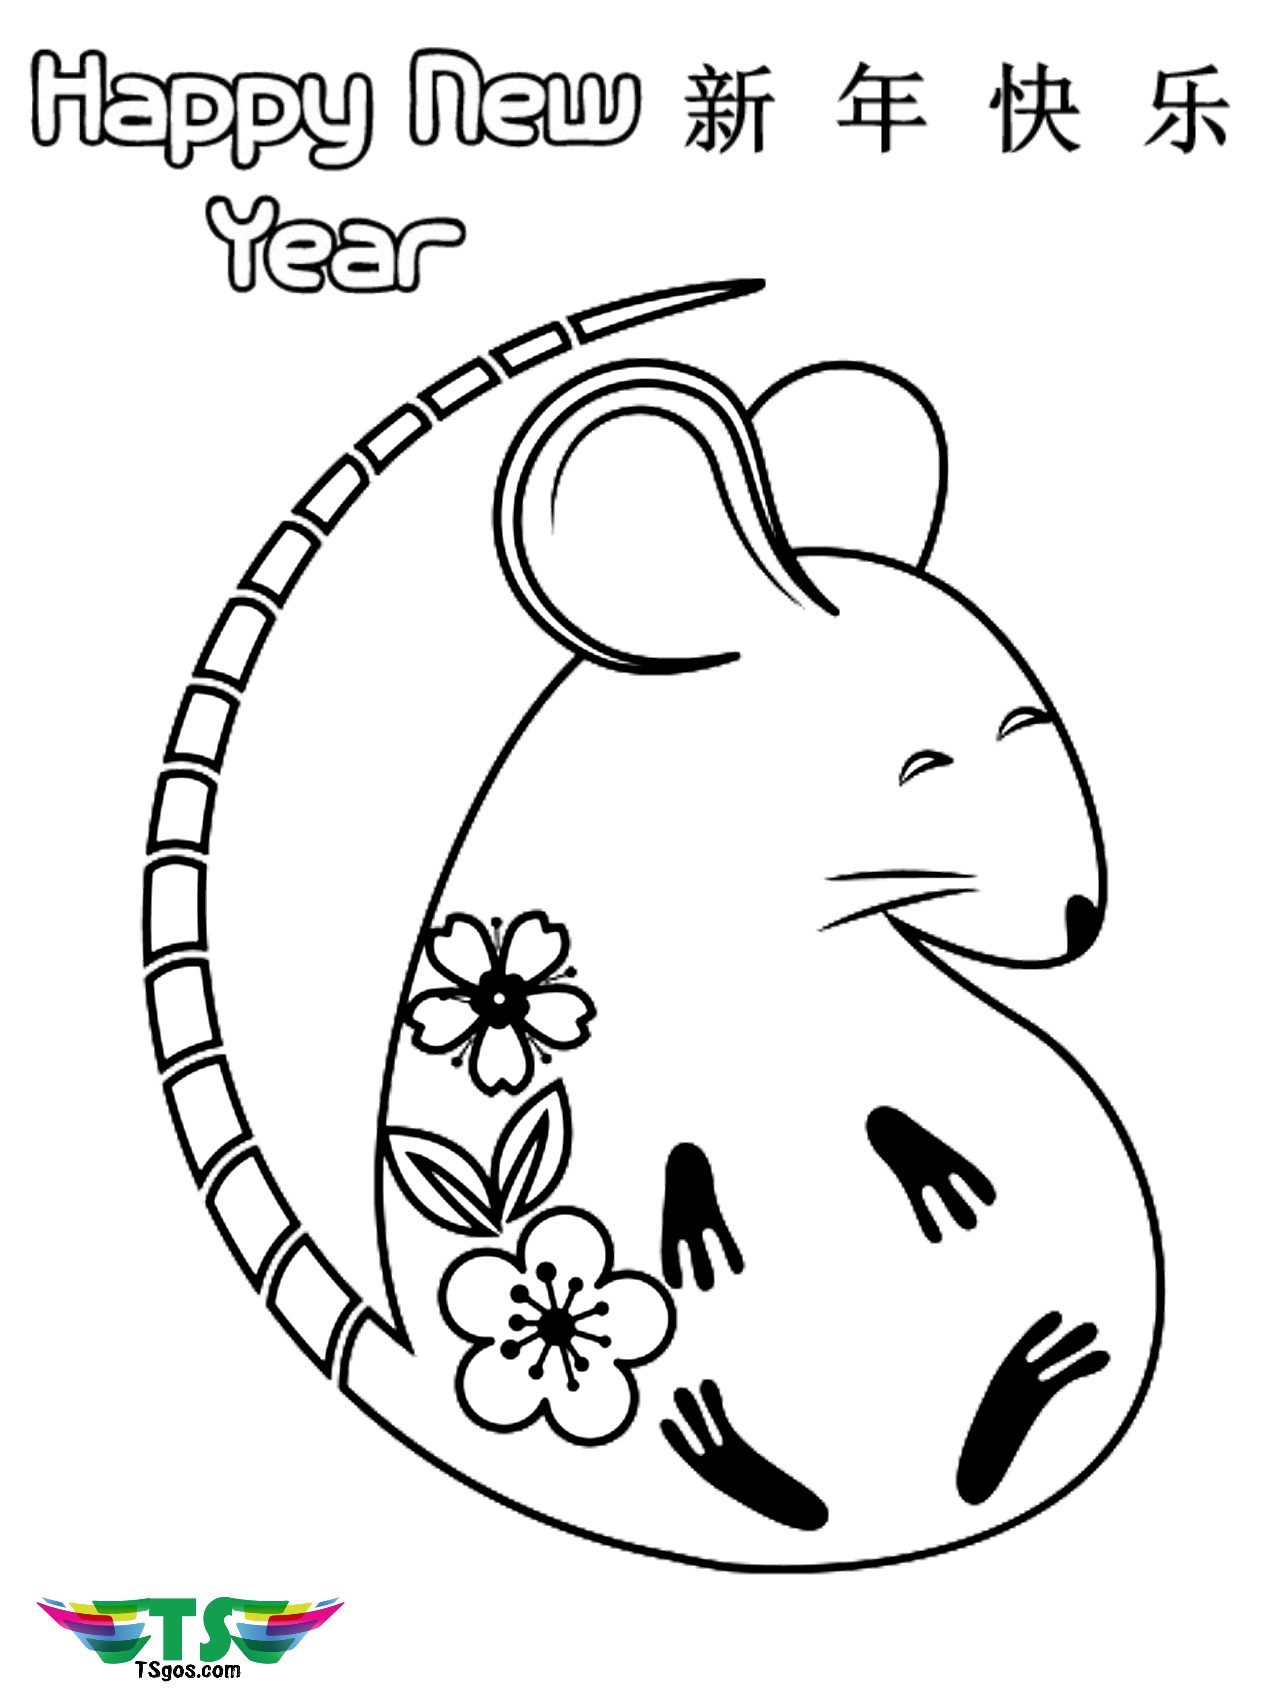 Happy chinese new year 2020 coloring page Wallpaper